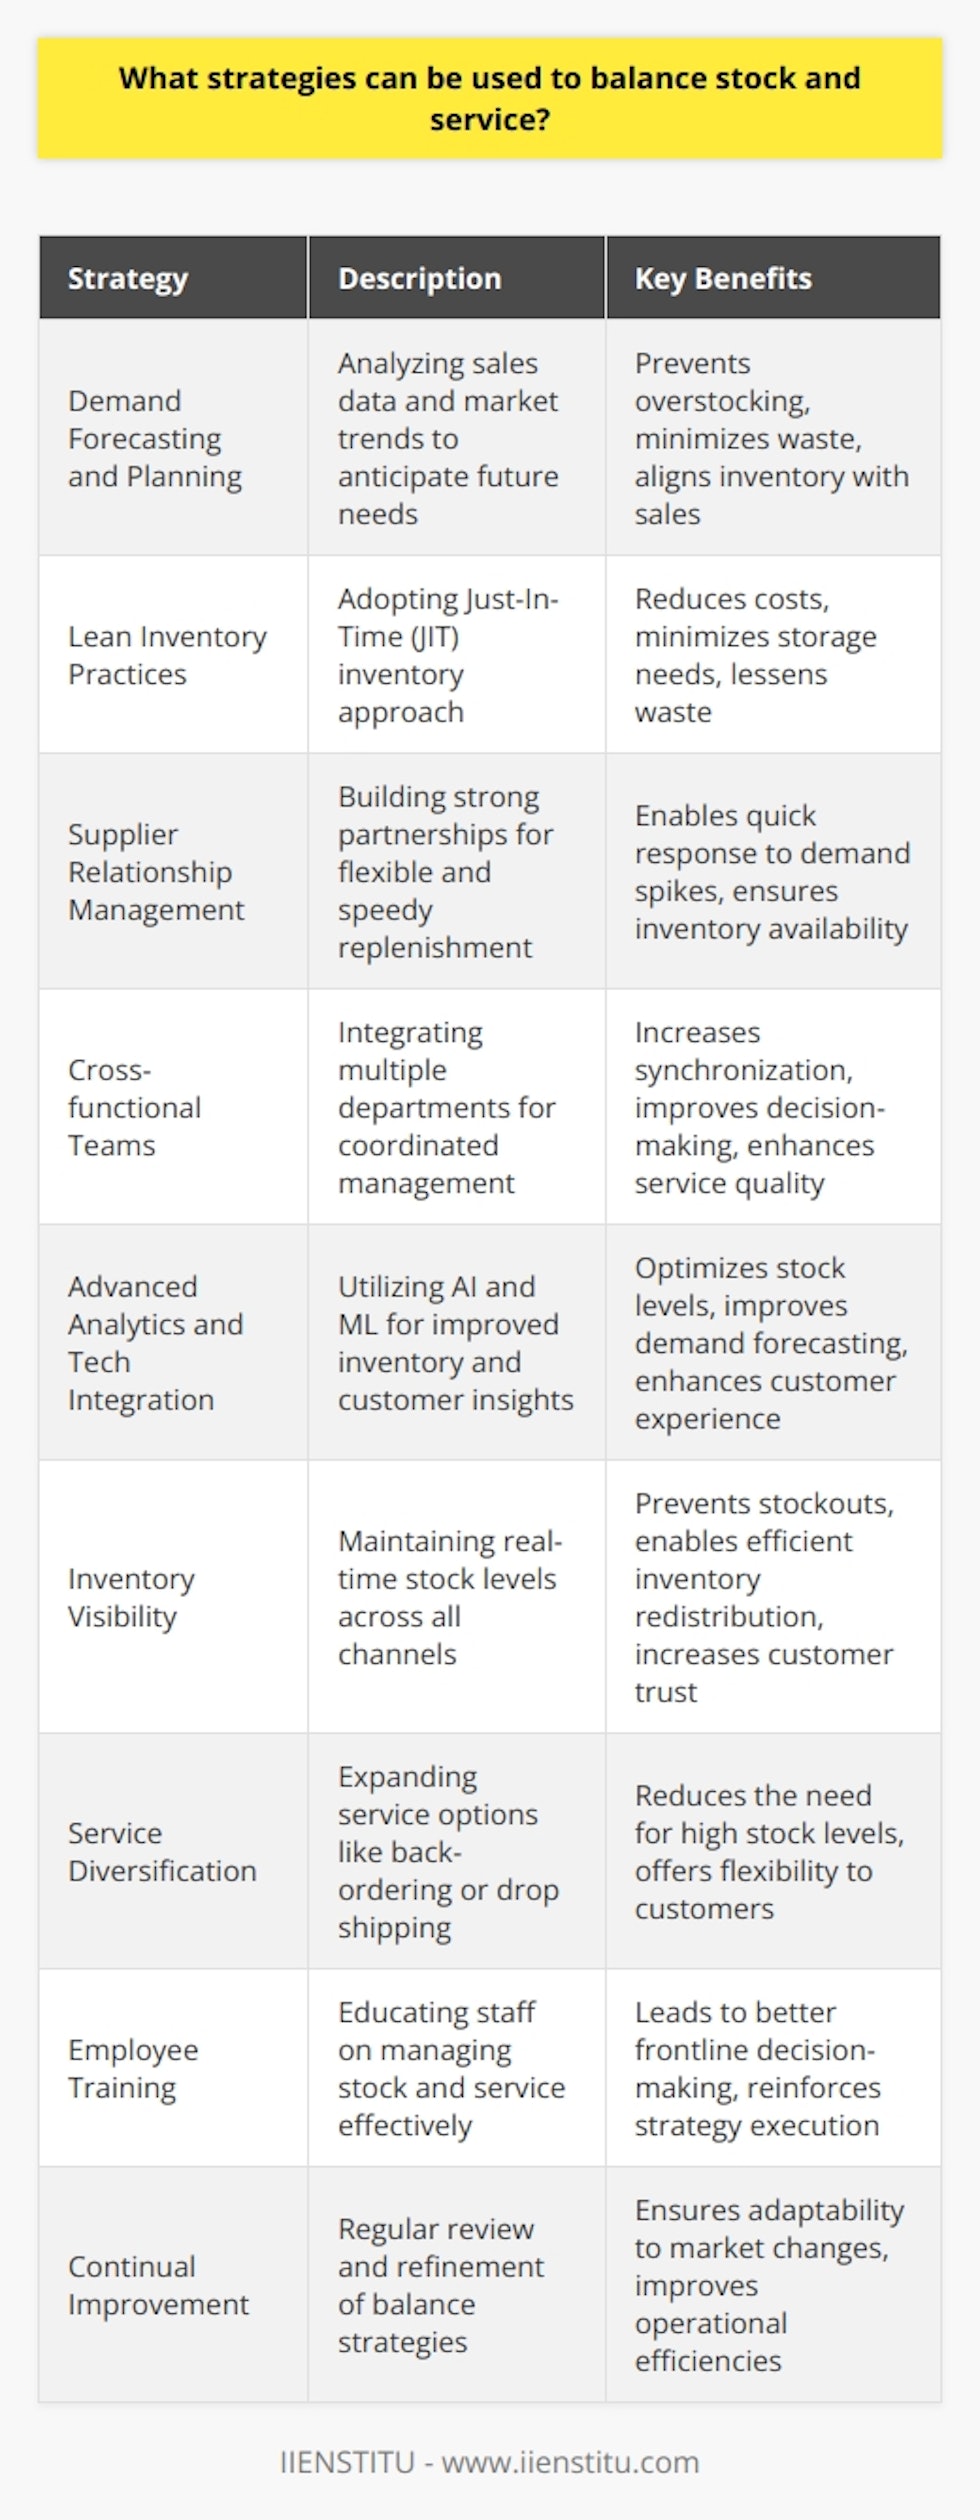 Balancing stock and service represents a critical equilibrium that businesses need to maintain to ensure they can meet customer demand without incurring unnecessary costs from excess inventory. Below are some strategies that businesses, including companies like IIENSTITU, can employ to achieve this balance:Demand Forecasting and Planning:Accurate demand forecasting is paramount in stock and service balance. This strategy requires analyzing historical sales data, market trends, and seasonal fluctuations to predict future demand. By doing so, businesses can stock inventory accordingly, ensuring they are prepared for anticipated sales without overstocking.Lean Inventory Practices:Implementing lean inventory practices such as Just-In-Time (JIT) can significantly help balance stock levels with service requirements. JIT aims to receive goods only as they are needed in the production process, thereby reducing inventory costs and waste.Supplier Relationship Management:Maintaining a good relationship with suppliers ensures that a business can rely on them for quick replenishment, enabling a lower inventory level while maintaining service quality. This entails negotiating better lead times and flexibility in order sizes, which can be critical in times of sudden demand spikes.Cross-functional Teams:Creating cross-functional teams comprising members from sales, customer service, logistics, and inventory management can improve coordination. This collective effort can more effectively anticipate demand shifts, manage stock levels, and deliver high-quality service.Advanced Analytics and Tech Integration:Leveraging advanced analytics and integrating technology like AI and machine learning for inventory and customer service management can yield significant improvements. These tools can provide deep insights into consumer behavior, predict demand more precisely, and optimize inventory accordingly while enhancing the customer experience.Inventory Visibility:Real-time inventory visibility across all channels is vital. This allows businesses to manage stock levels accurately, prevent stockouts, and redistribute inventory where it's needed most. Furthermore, providing customers with visibility into stock levels can improve trust and service satisfaction.Service Diversification:Offering alternative services such as back-ordering, drop shipping, or local pickup can balance the need for high stock levels with a high level of service by giving customers options when certain items are not immediately available.Employee Training:Ensuring that all employees understand the importance of stock and service balance and are trained to manage both effectively can lead to better decision-making at the front lines, which is crucial in dynamic business environments.Continual Improvement:Businesses should adopt a culture of continuous improvement where strategies for balancing stock and service are regularly reviewed and refined based on new data, customer feedback, and operational efficiencies observed.In conclusion, businesses can achieve a balance between stock and service by employing a mix of strategies that involve careful planning, leveraging technology, fostering strong relations with suppliers, enhancing visibility, and training employees. It is a dynamic process that requires continual attention and adaptation to changes in the market. By focusing on these strategies, businesses like IIENSTITU, and others, can ensure that they meet customer expectations efficiently and effectively.